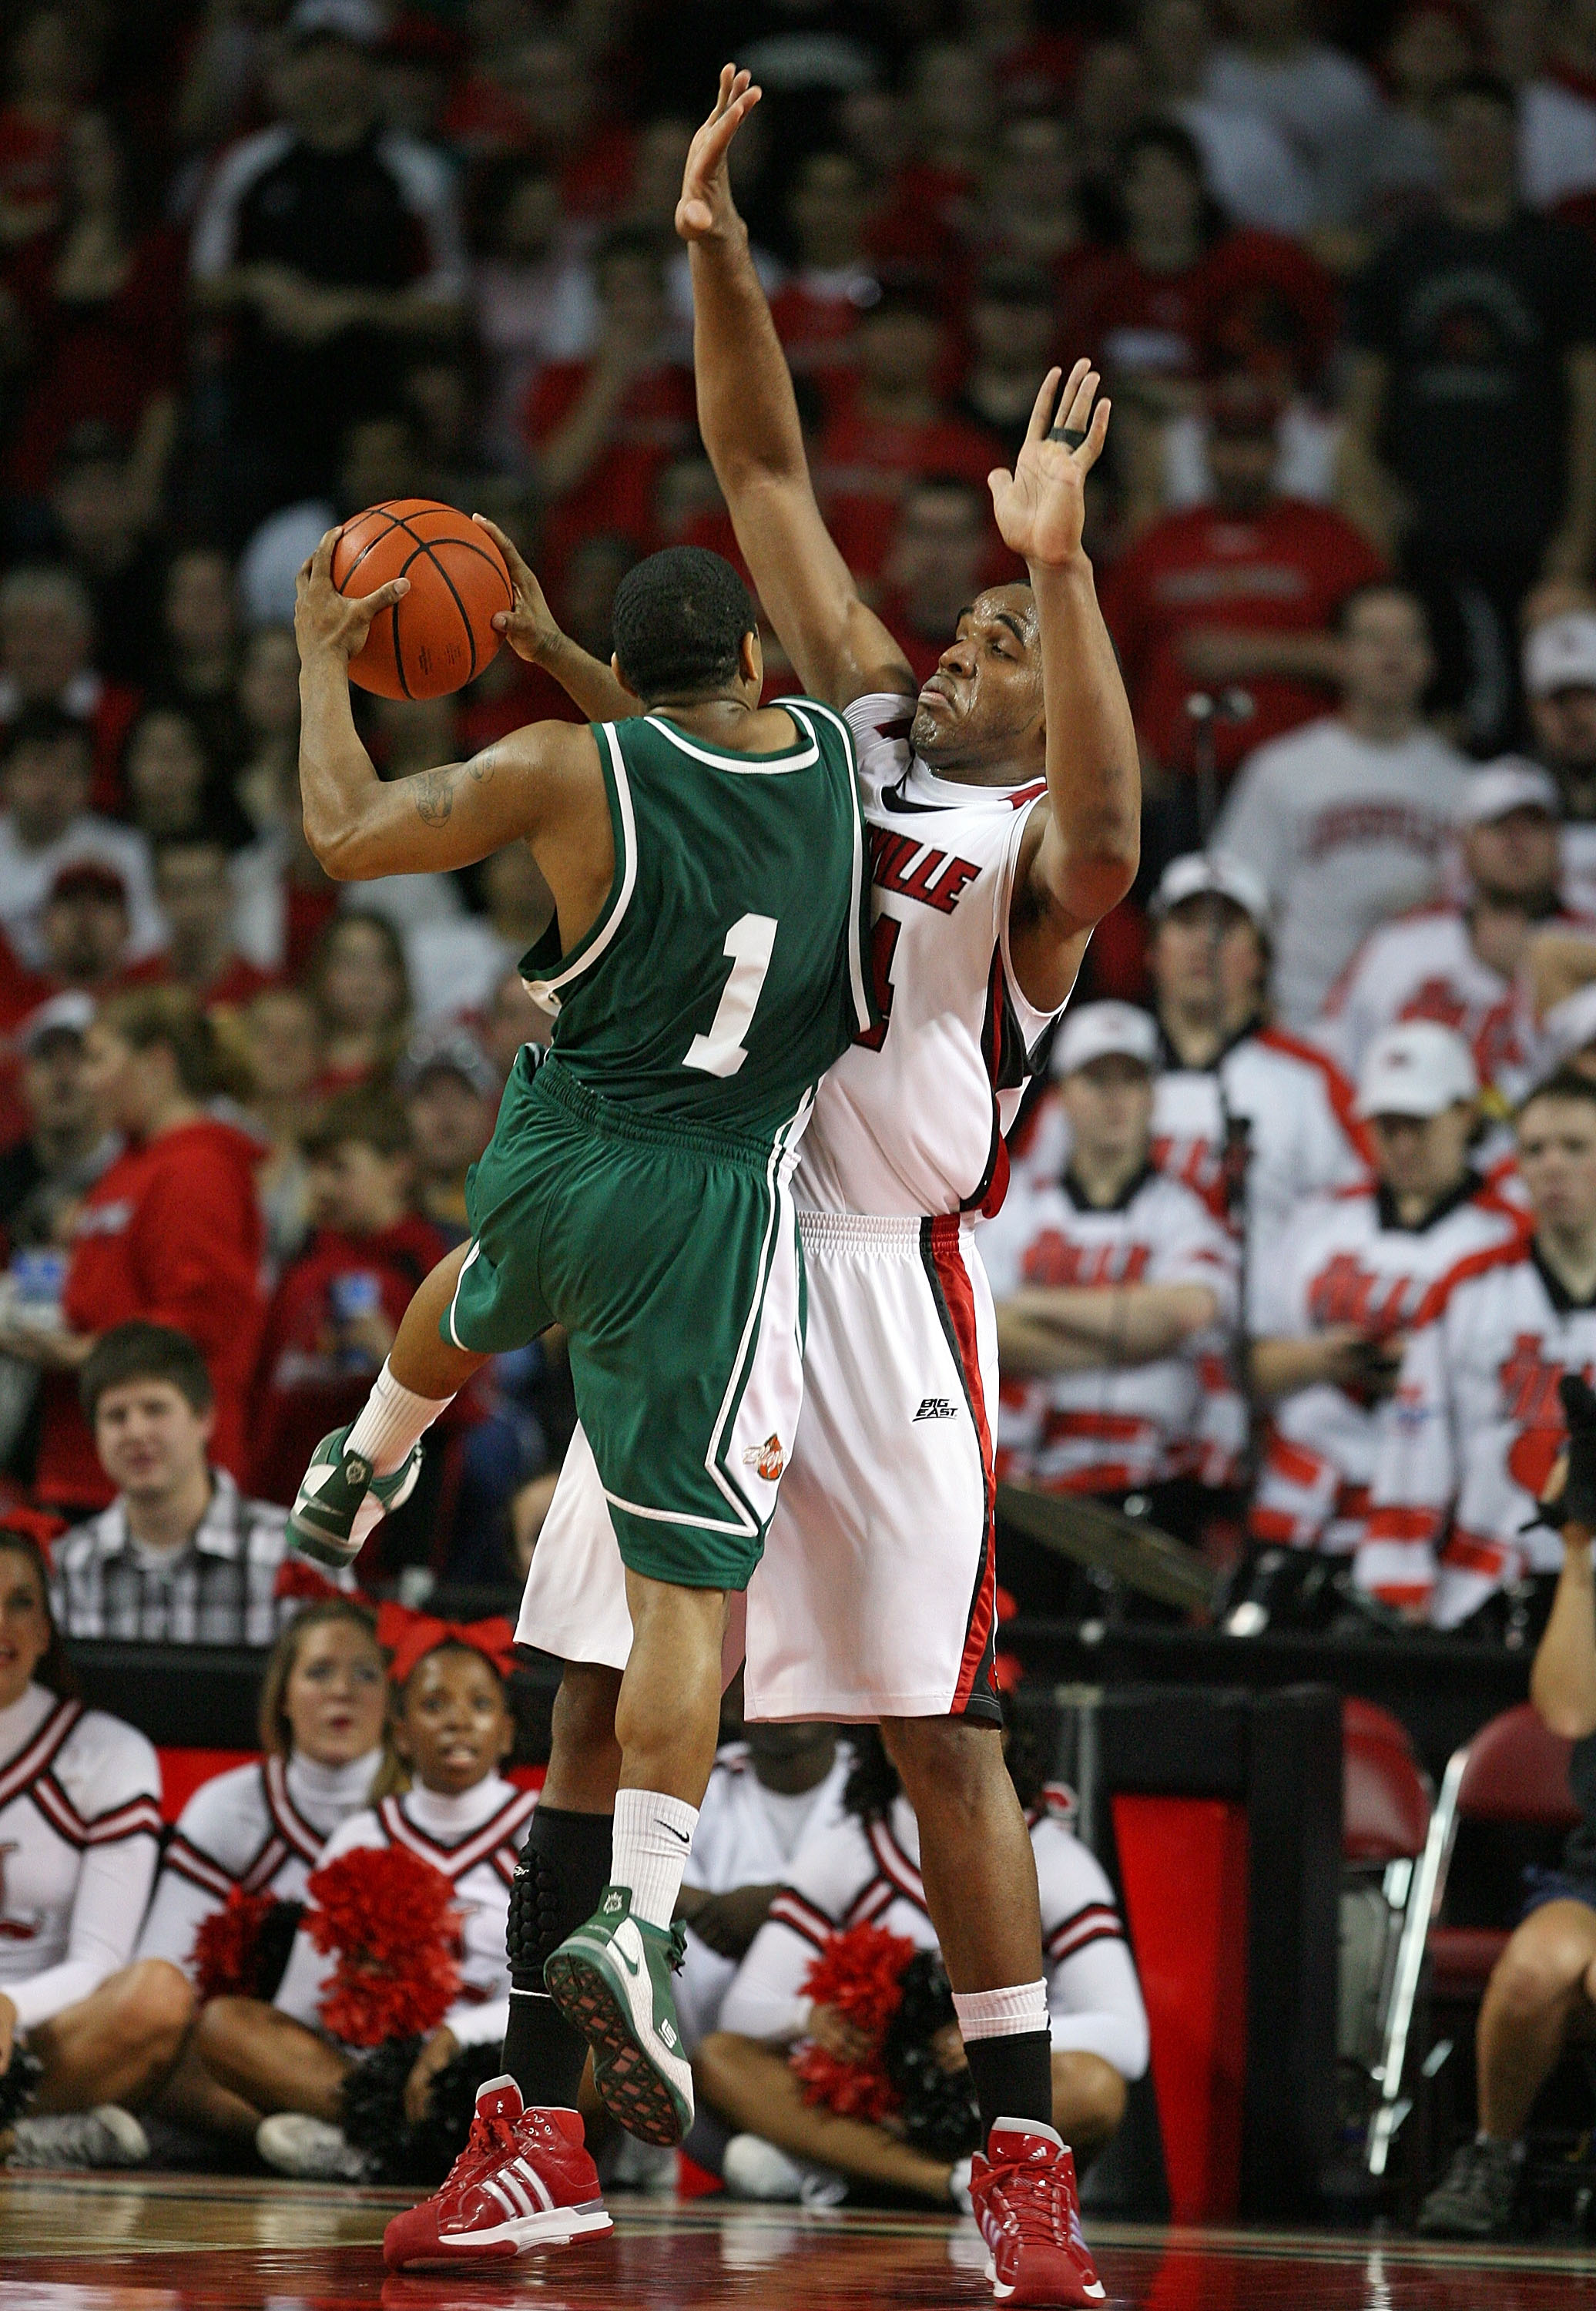 LOUISVILLE, KY - DECEMBER 27:  Samardo Samuels #24 of the Louisville Cardinals puts defensive pressure on Aaron Johnson #1 of the UAB Blazers during the game on December 27, 2008 at Freedom Hall in Louisville, Kentucky.  Louisville won 82-62.  (Photo by A